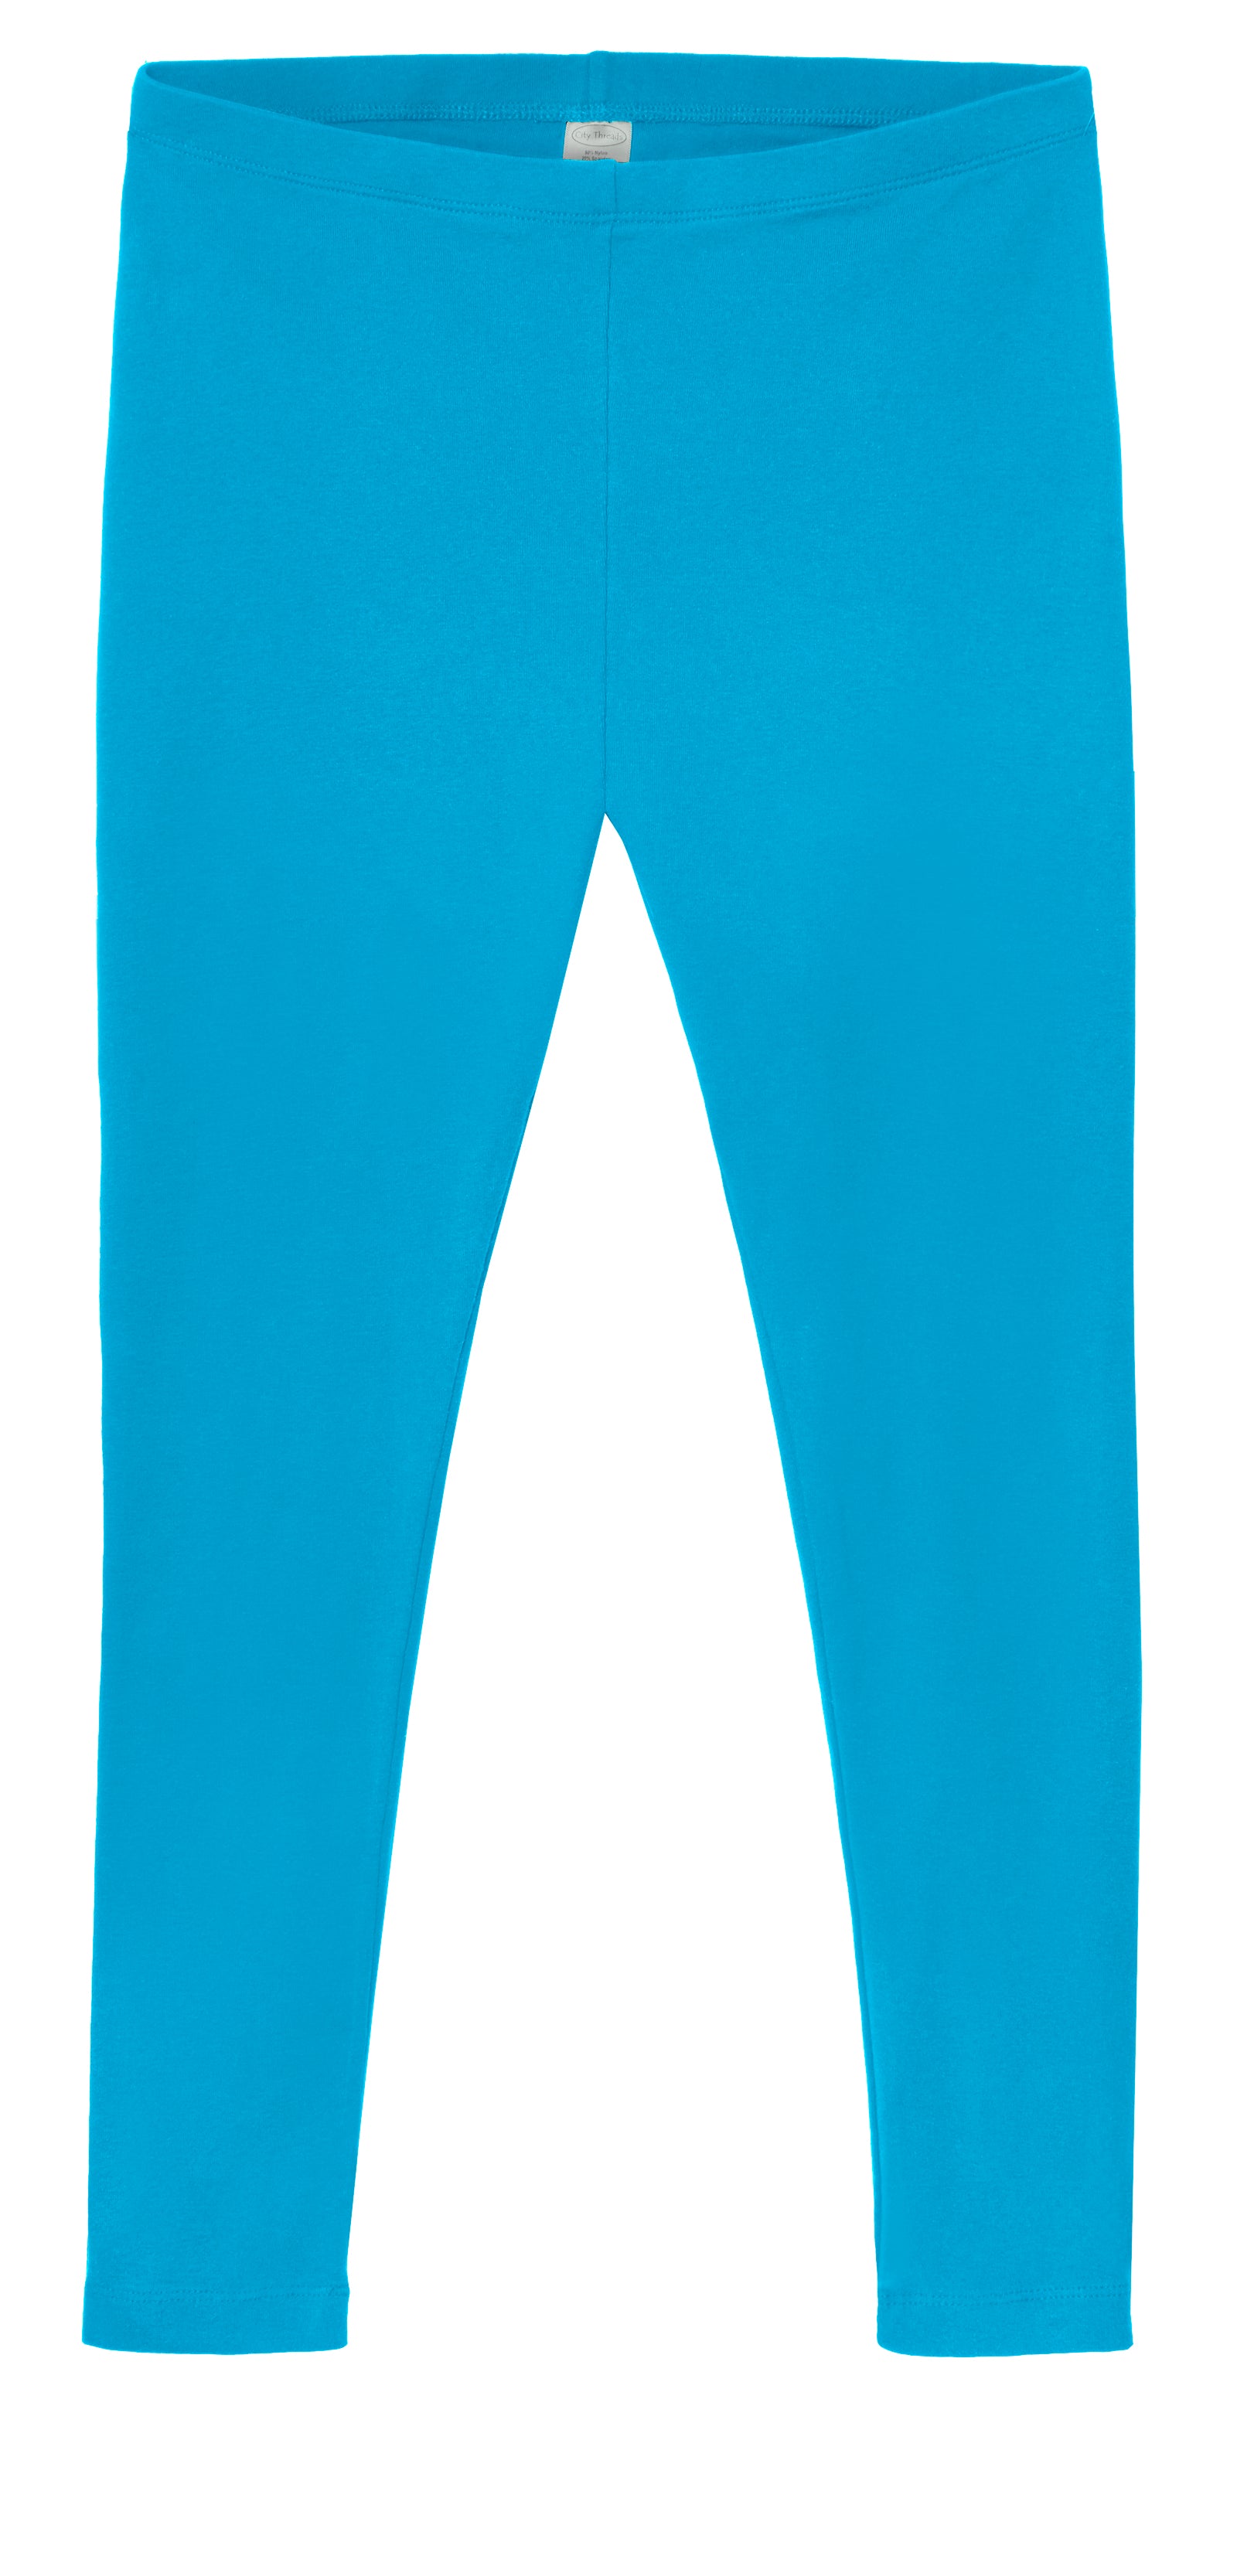 Girls' Leggings 100% Cotton for School Uniform Sports Coverage or Play  Perfect for Sensitive Skin or SPD Sensory Friendly Clothing, Turquoise, 3T  